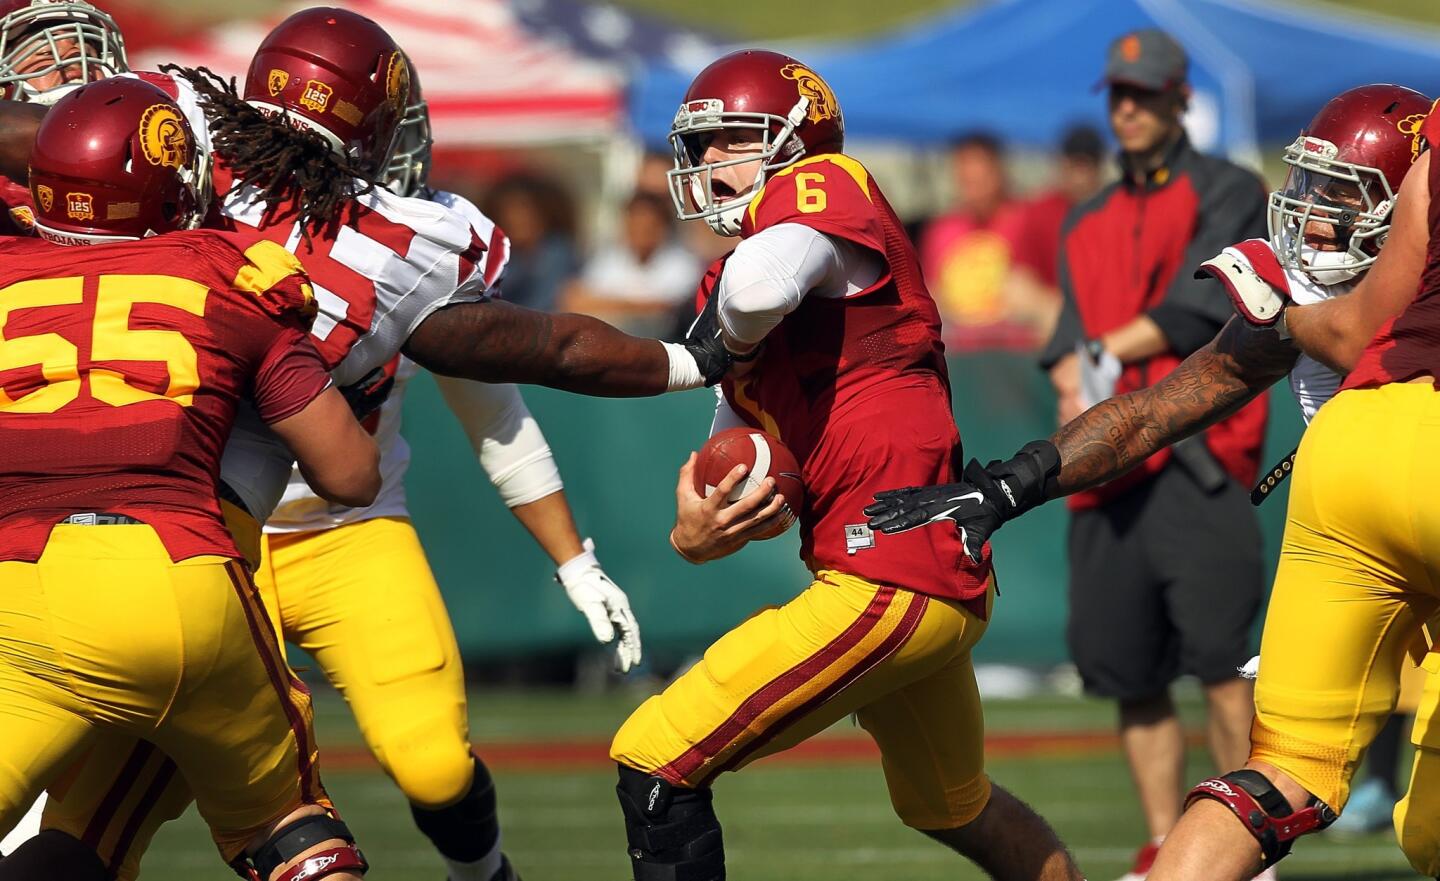 USC quarterback Cody Kessler tries to avoid being sacked during the Trojans' spring game at the Coliseum.